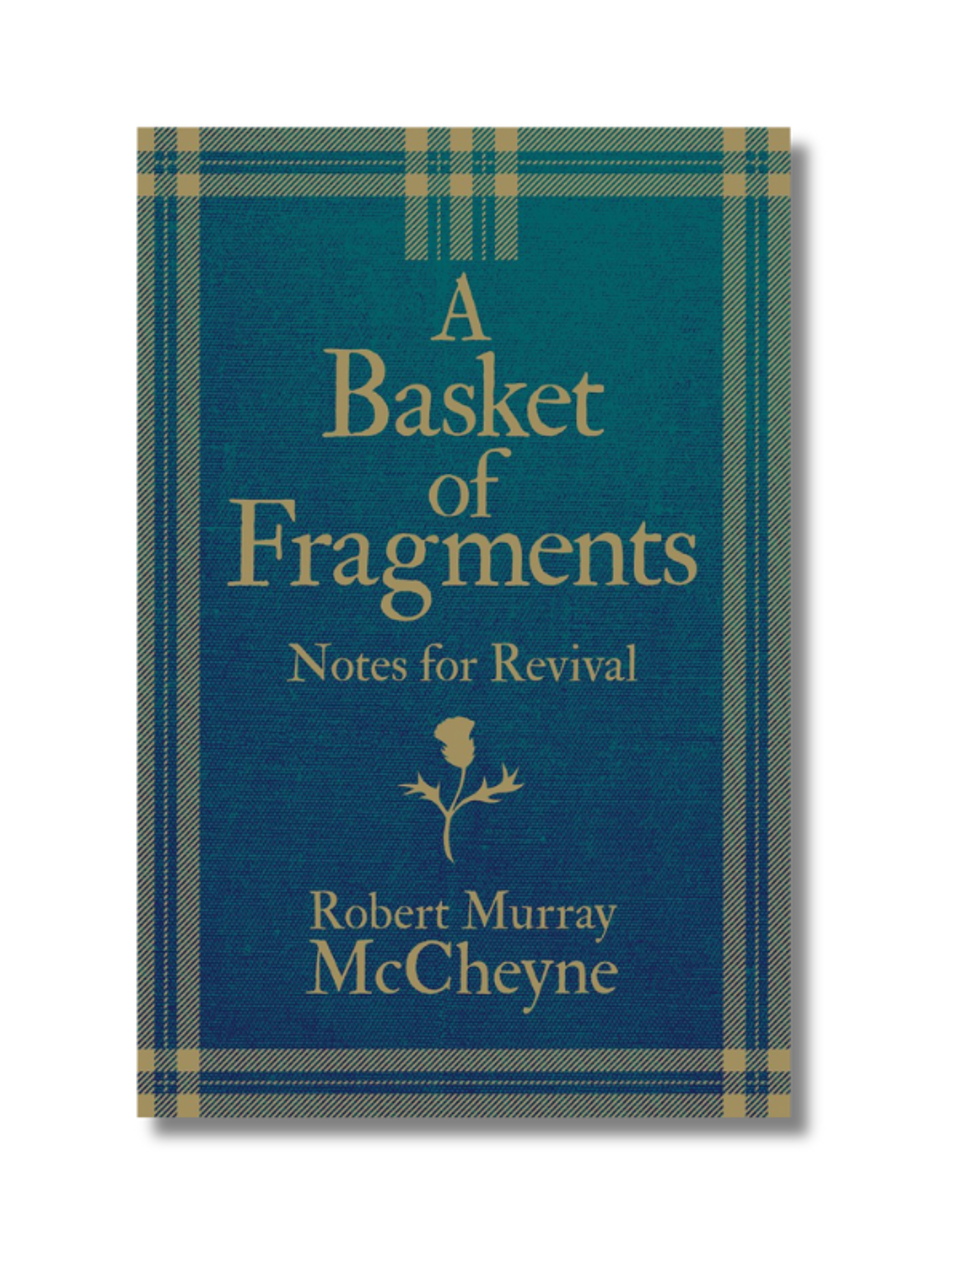 A Basket of Fragments: Notes for Revival (Hardcover)